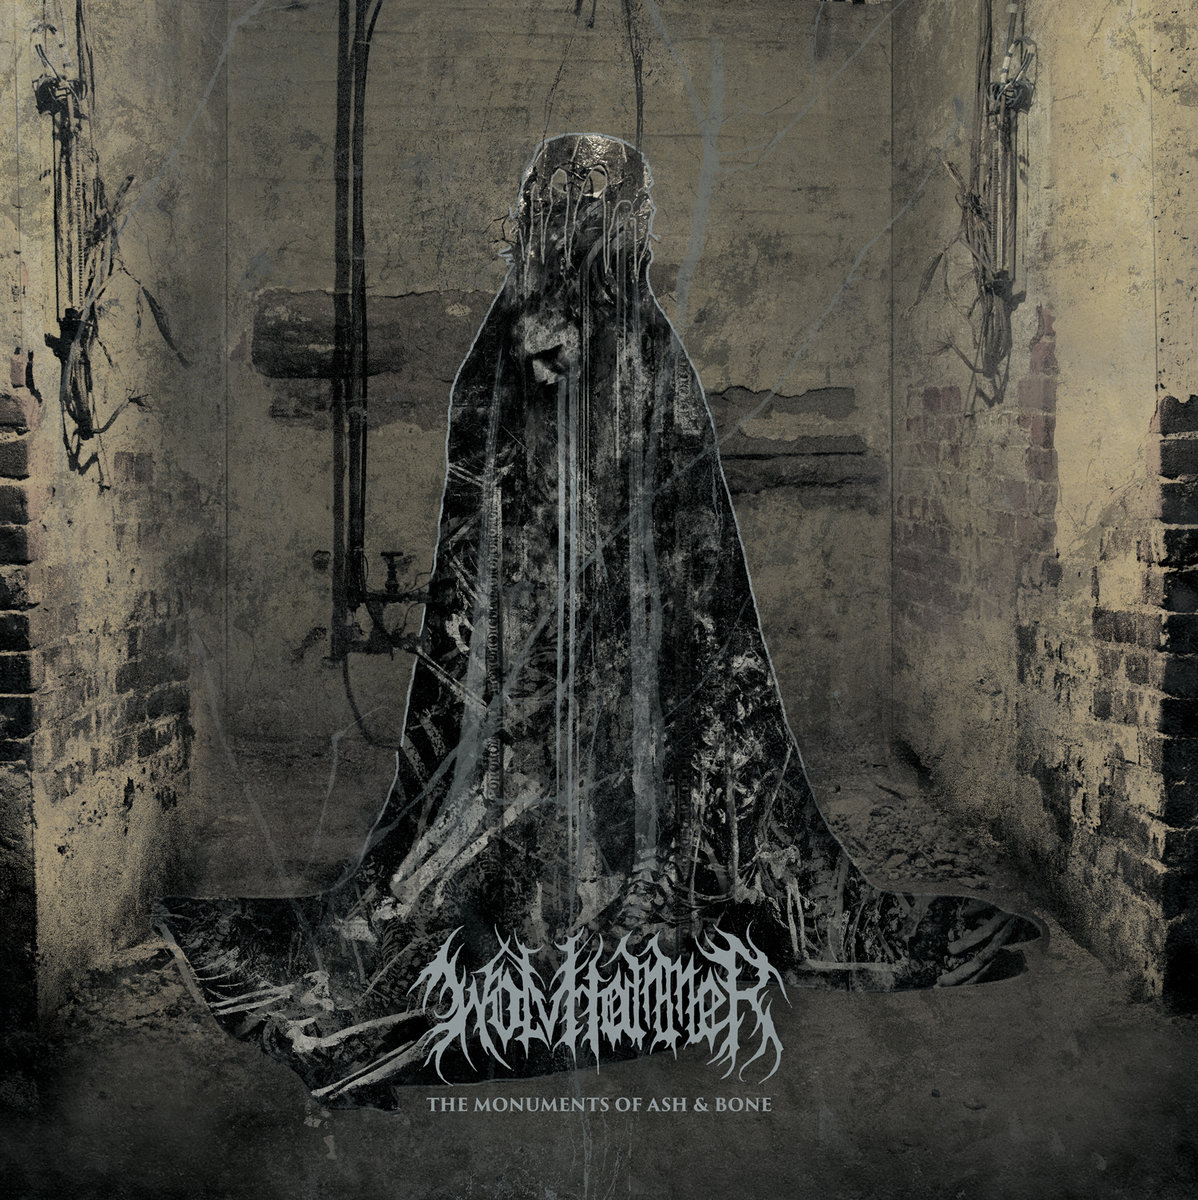 Wolvhammer – The Monuments of Ash & Bone